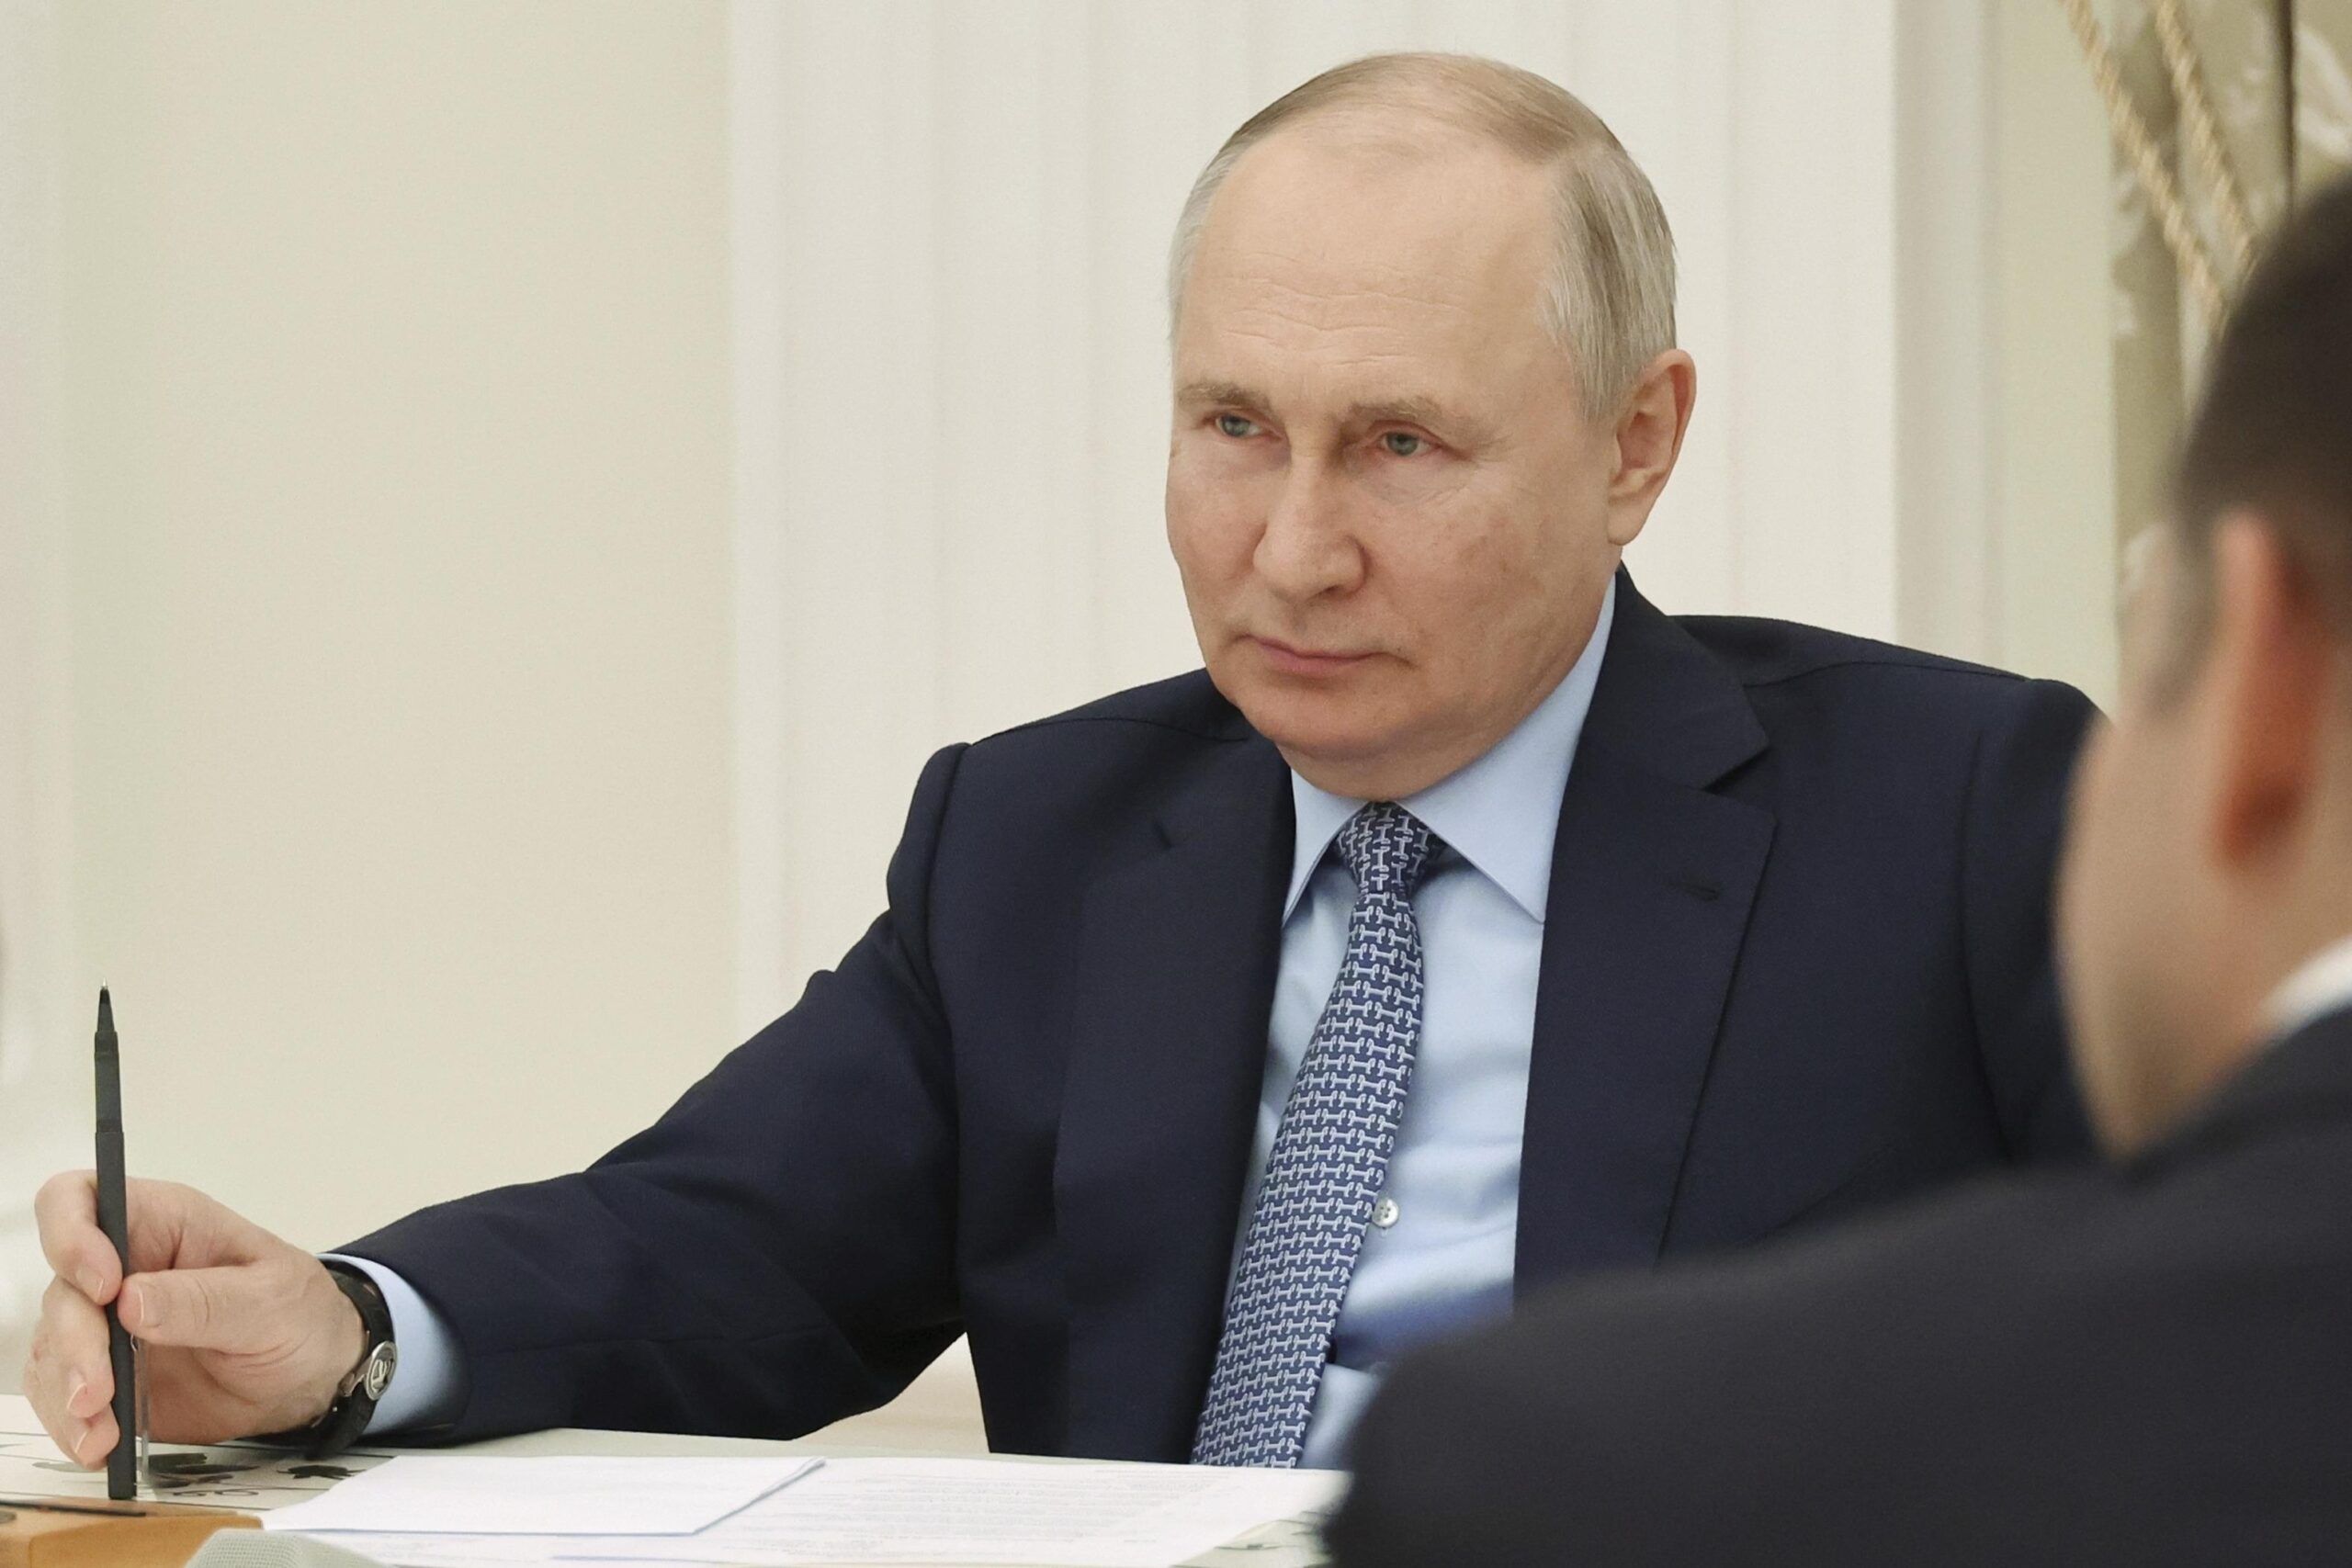 Russia suspends tax treaties with ‘unfriendly countries’